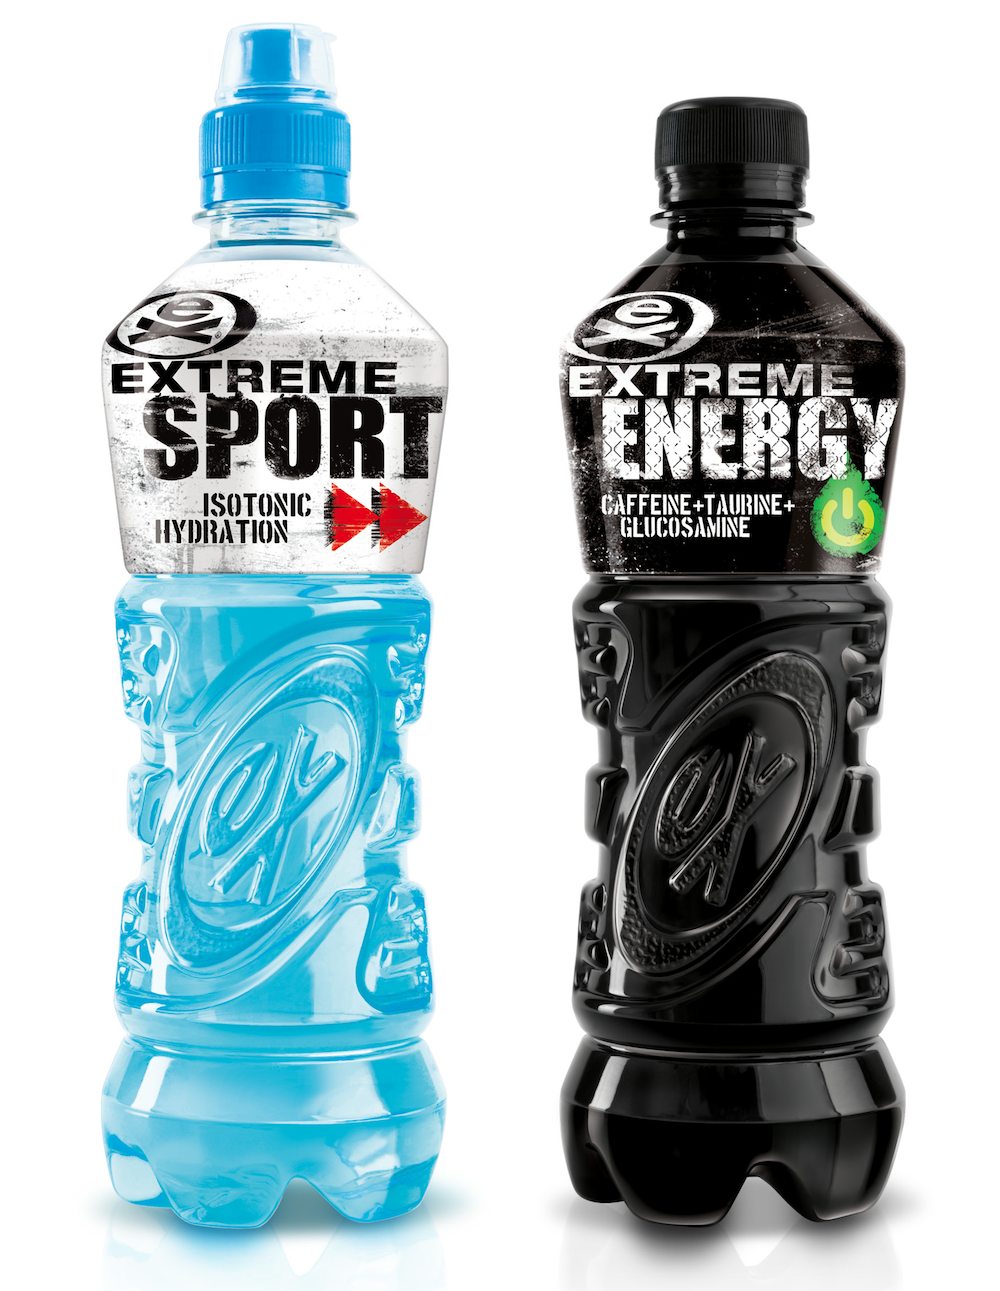 Photo: Extreme, a new soft drink from Vimto